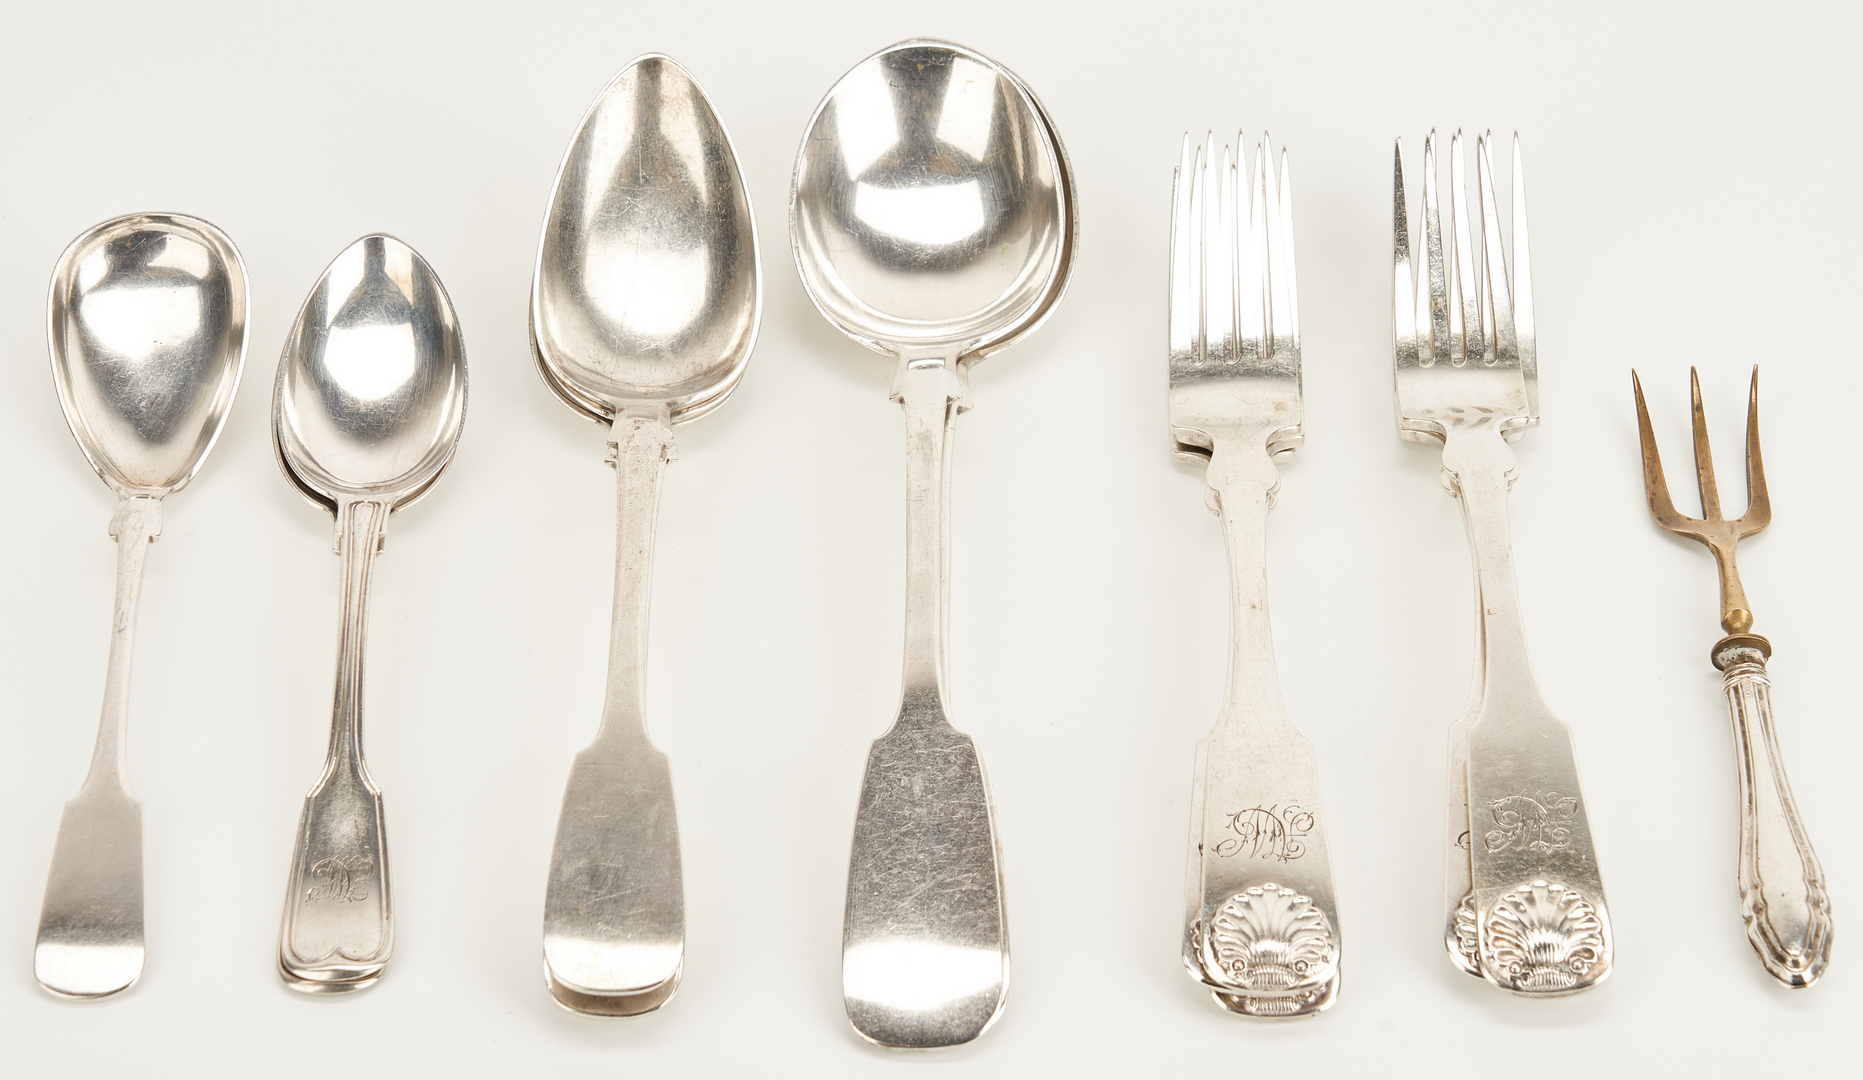 Lot 788: 15 Continental Silver Forks and Spoons